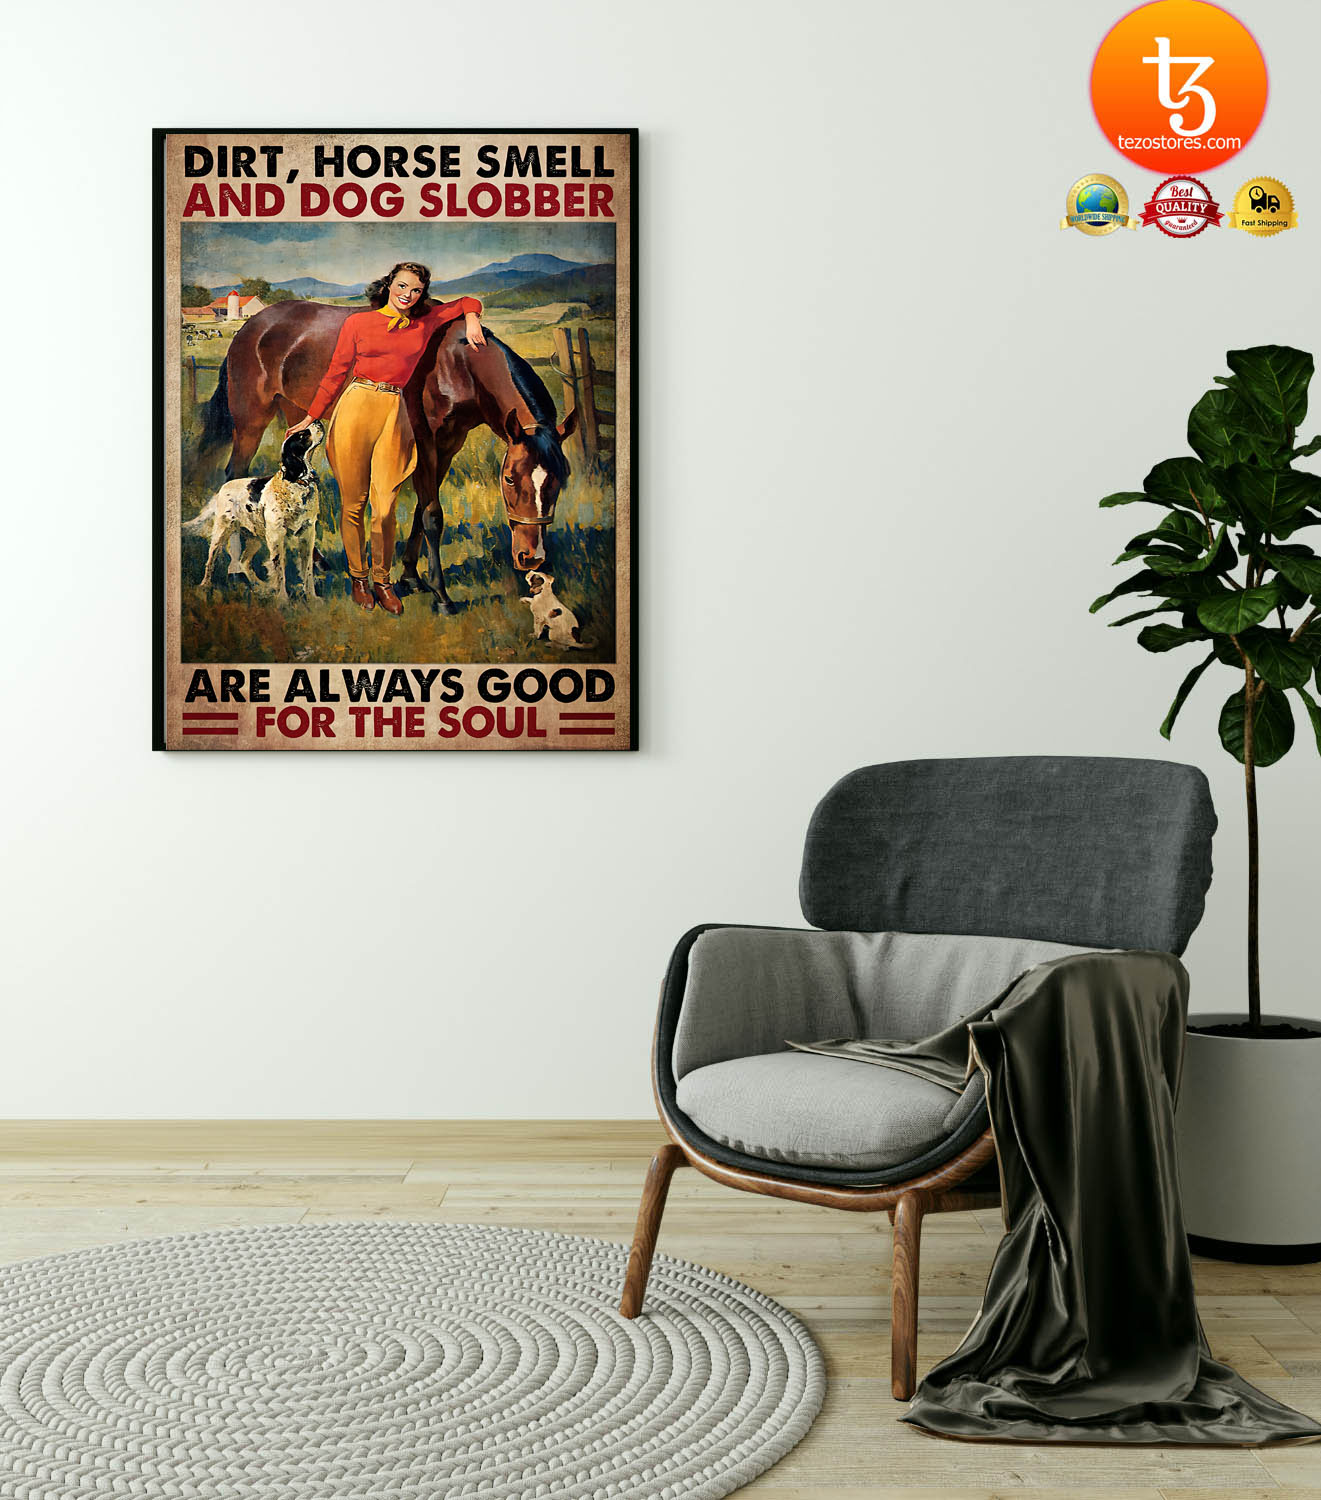 Dirt horse smell and dog slobber are always good for the soul poster1